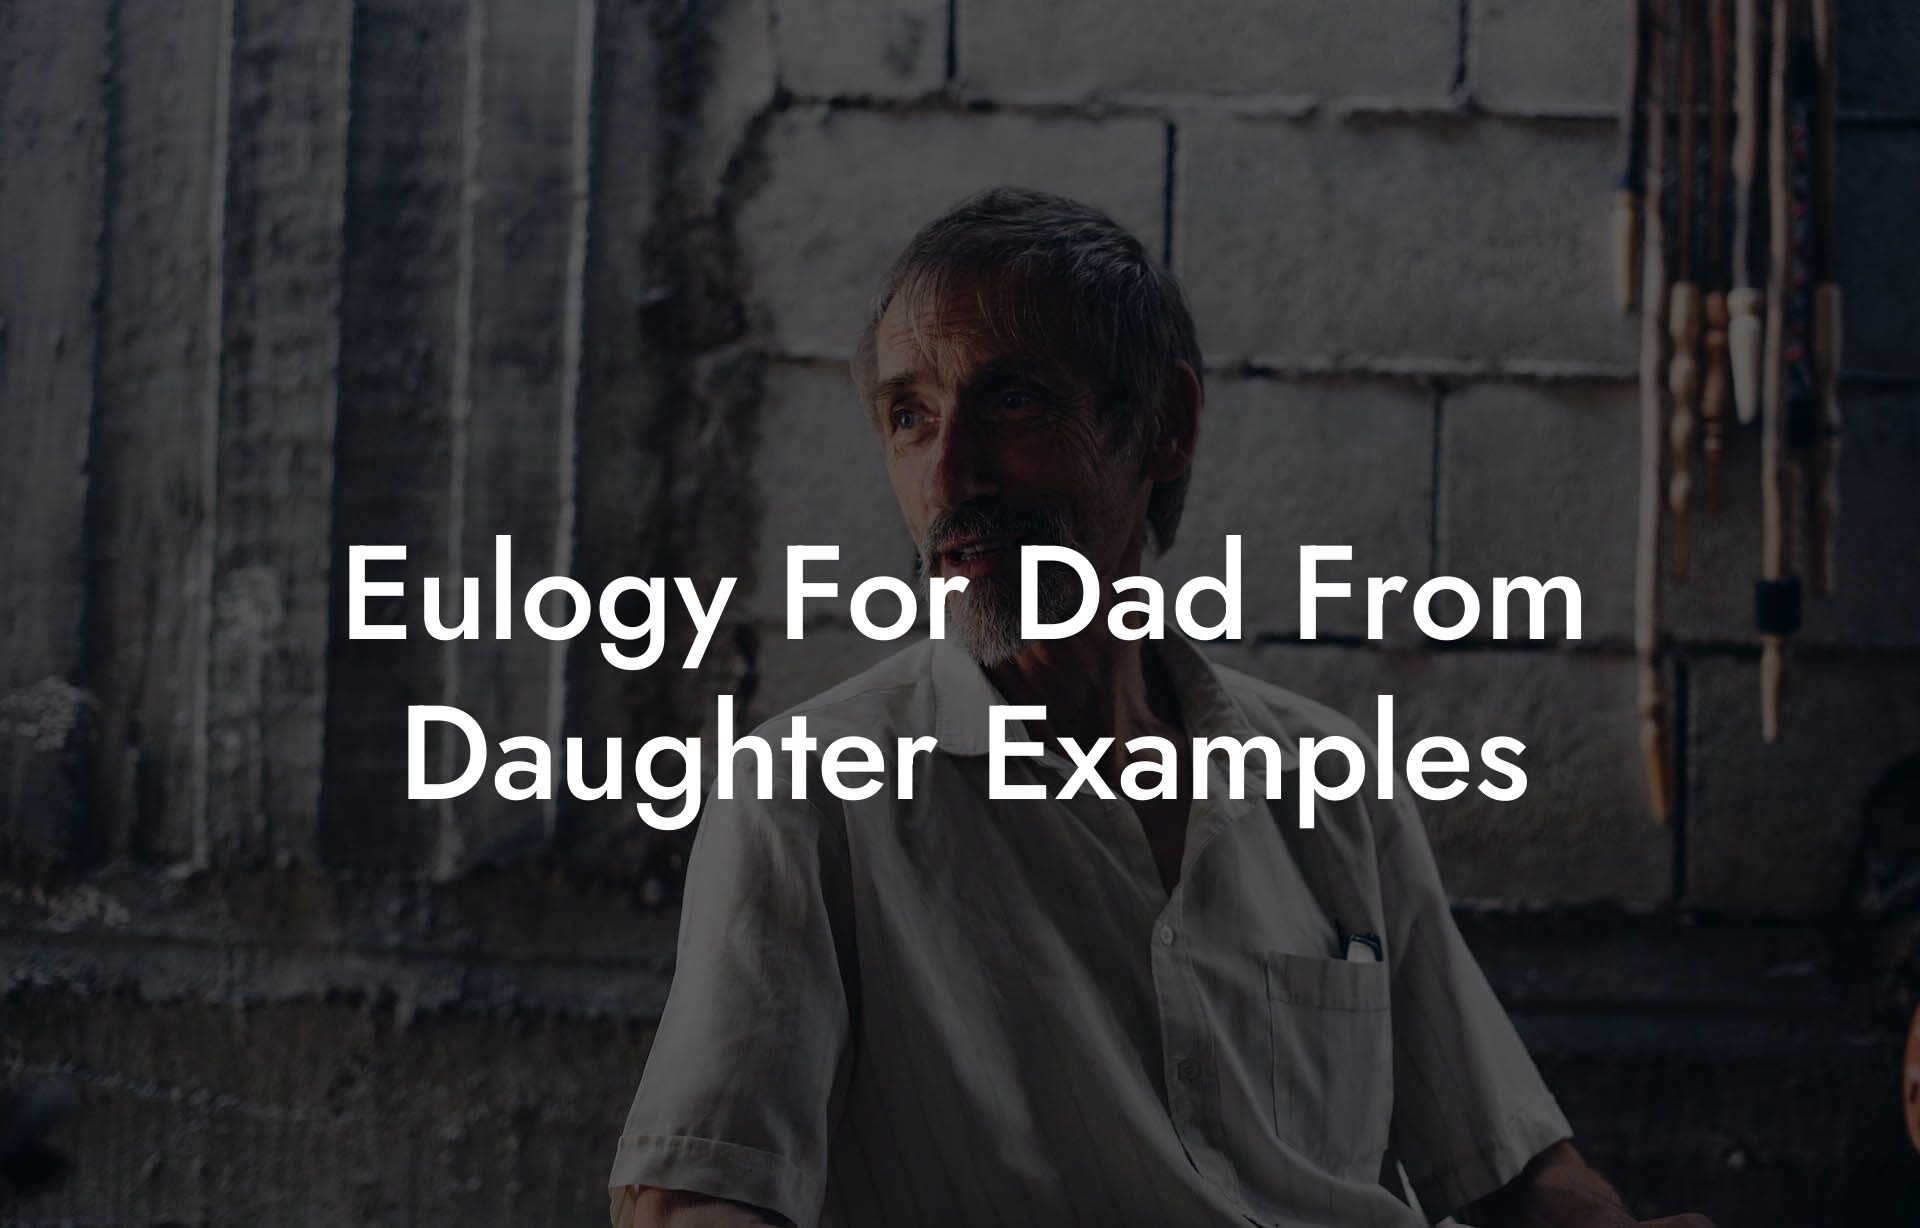 Eulogy For Dad From Daughter Examples